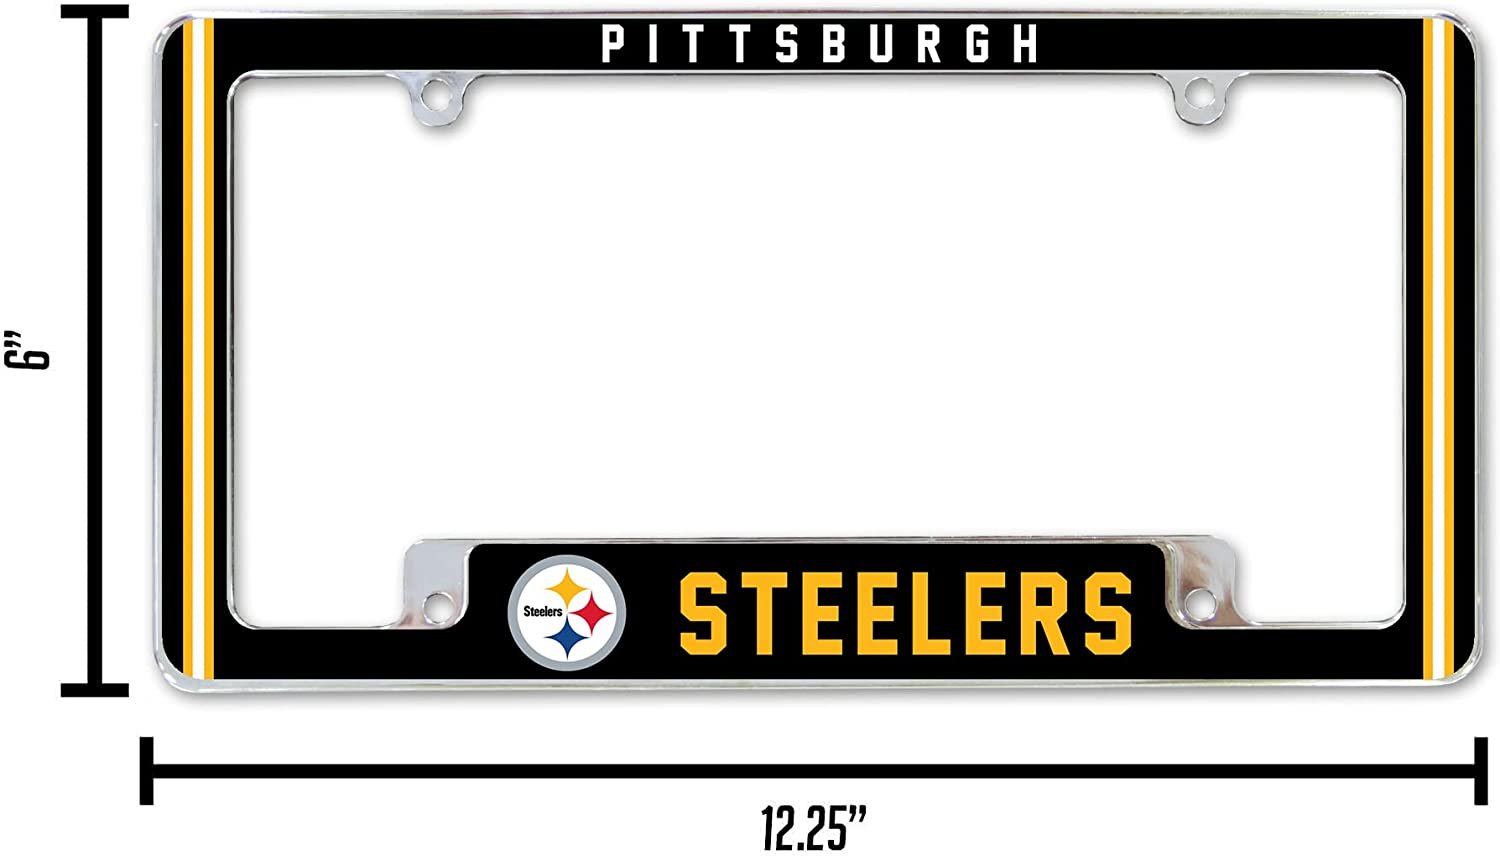 Pittsburgh Steelers Metal License Plate Frame Chrome Tag Cover Alternate Design 6x12 Inch